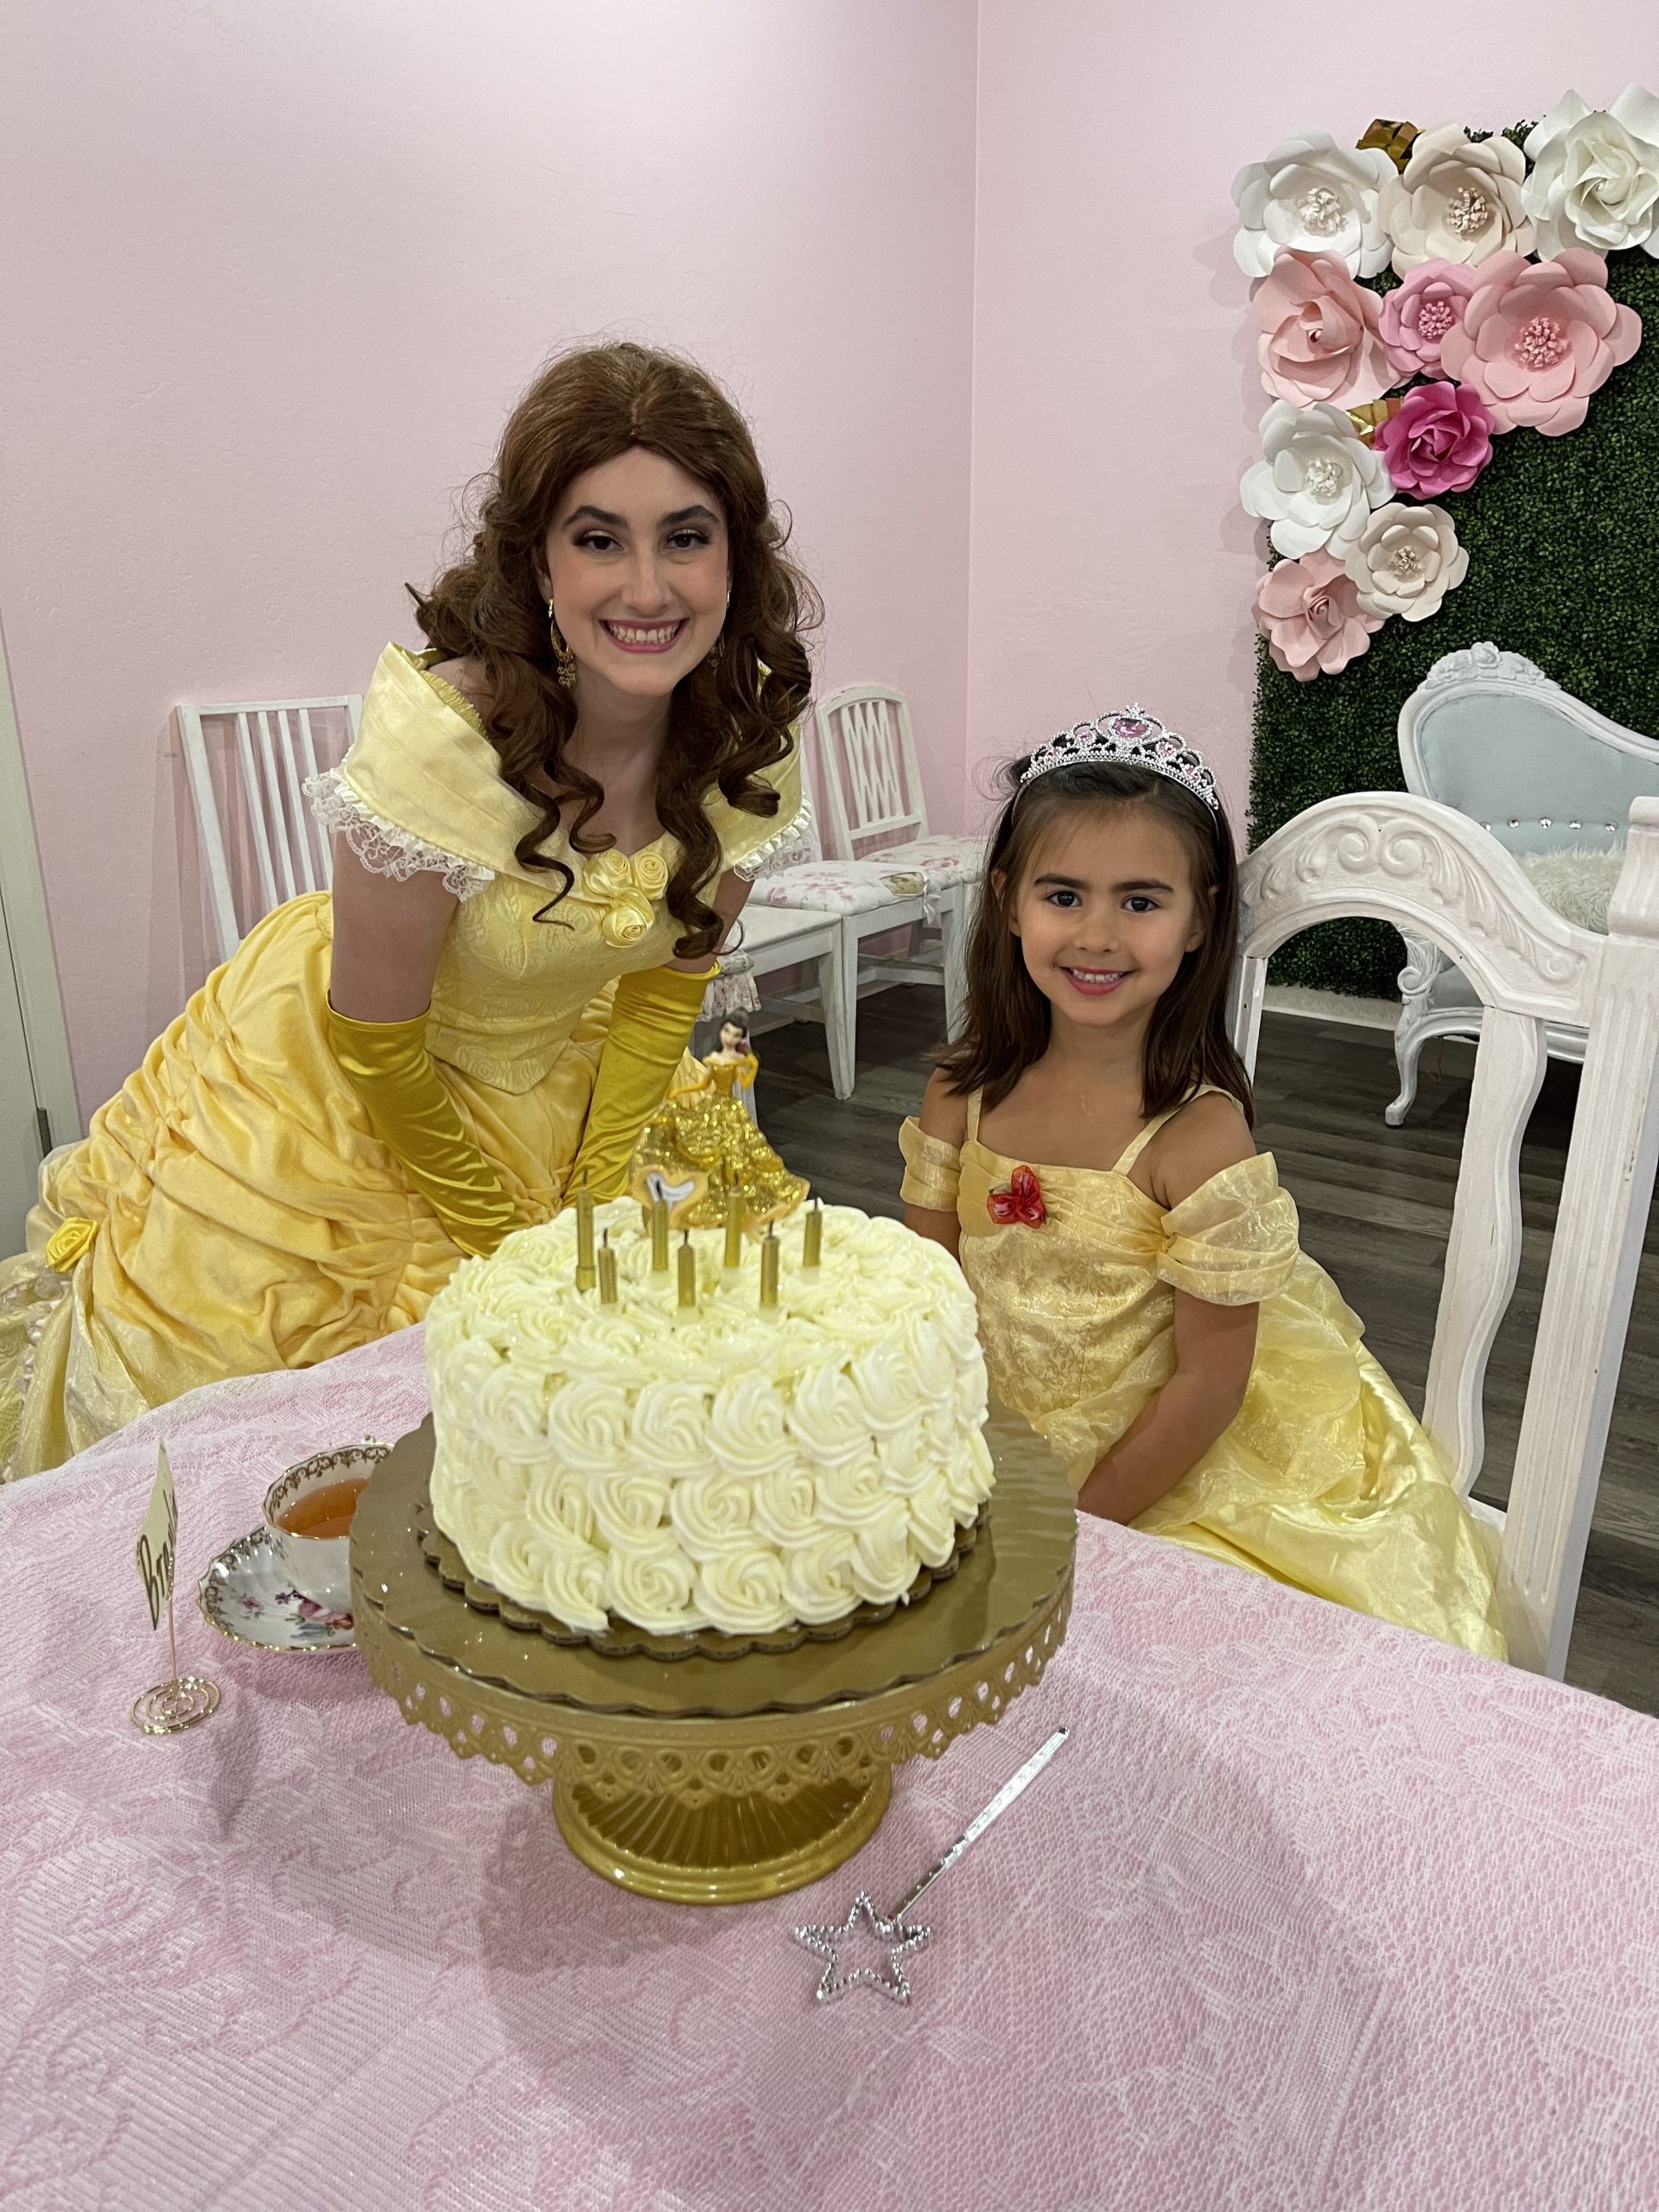 Belle posing next to a little girl dressed as Belle with a Belle-themed birthday cake.